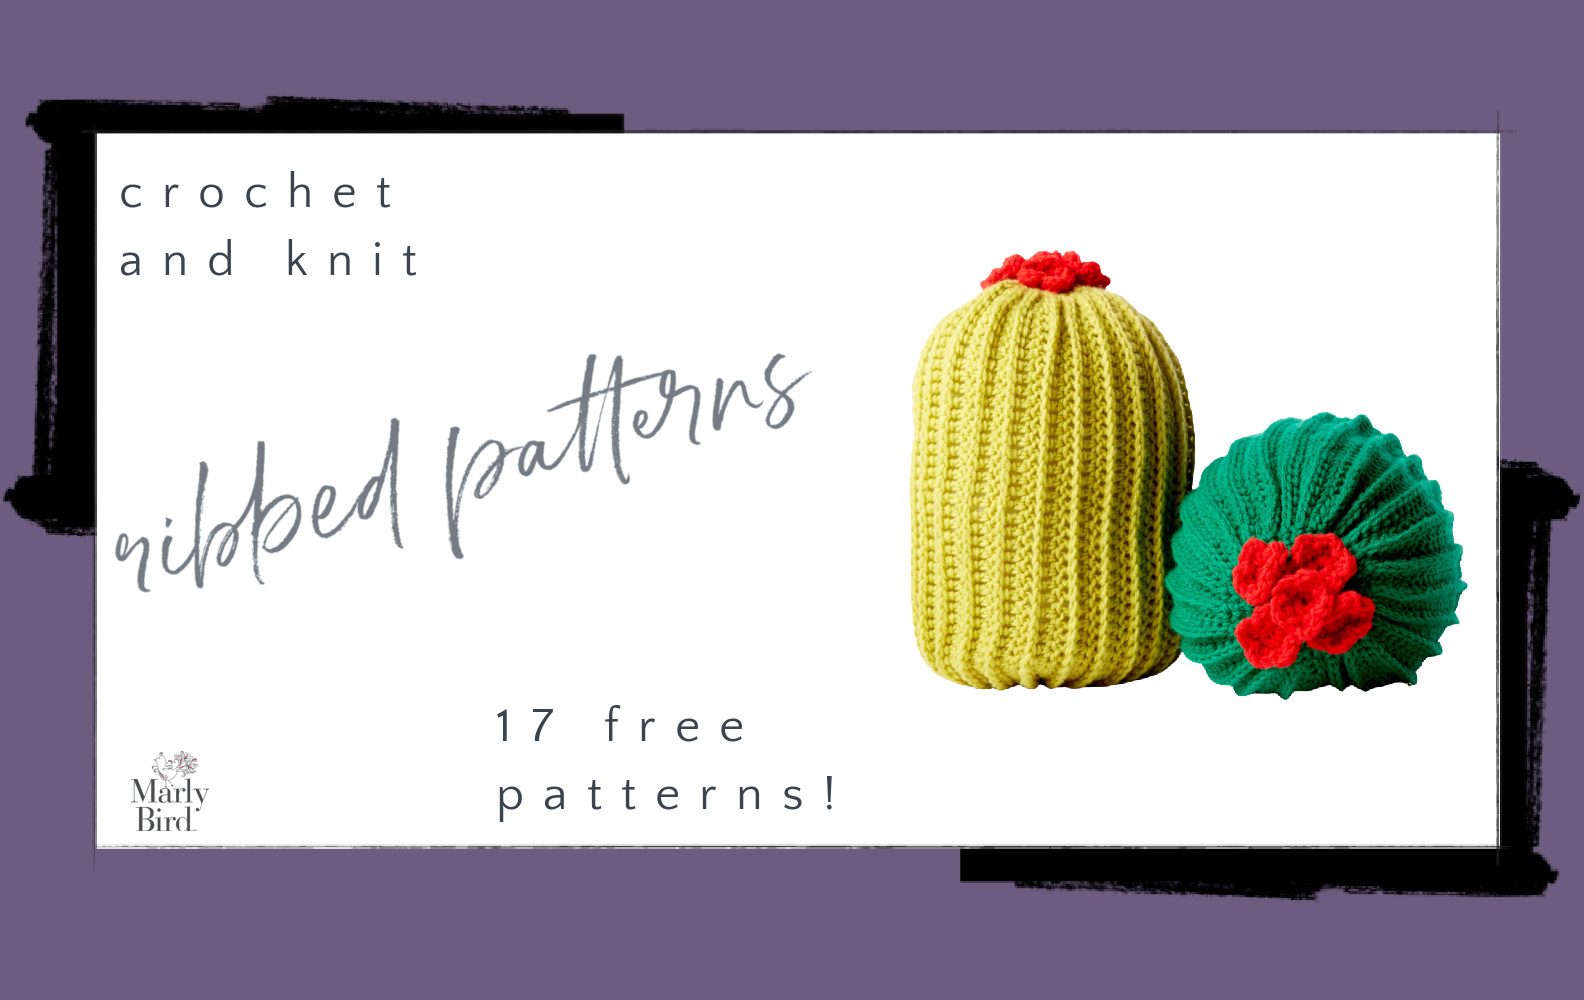 Promotional image featuring the text "ribbed patterns" with 17 free patterns offered by Marly Bird, displayed alongside two knitted items resembling a yellow cactus with a red flower and a green sea shell. -Marly Bird